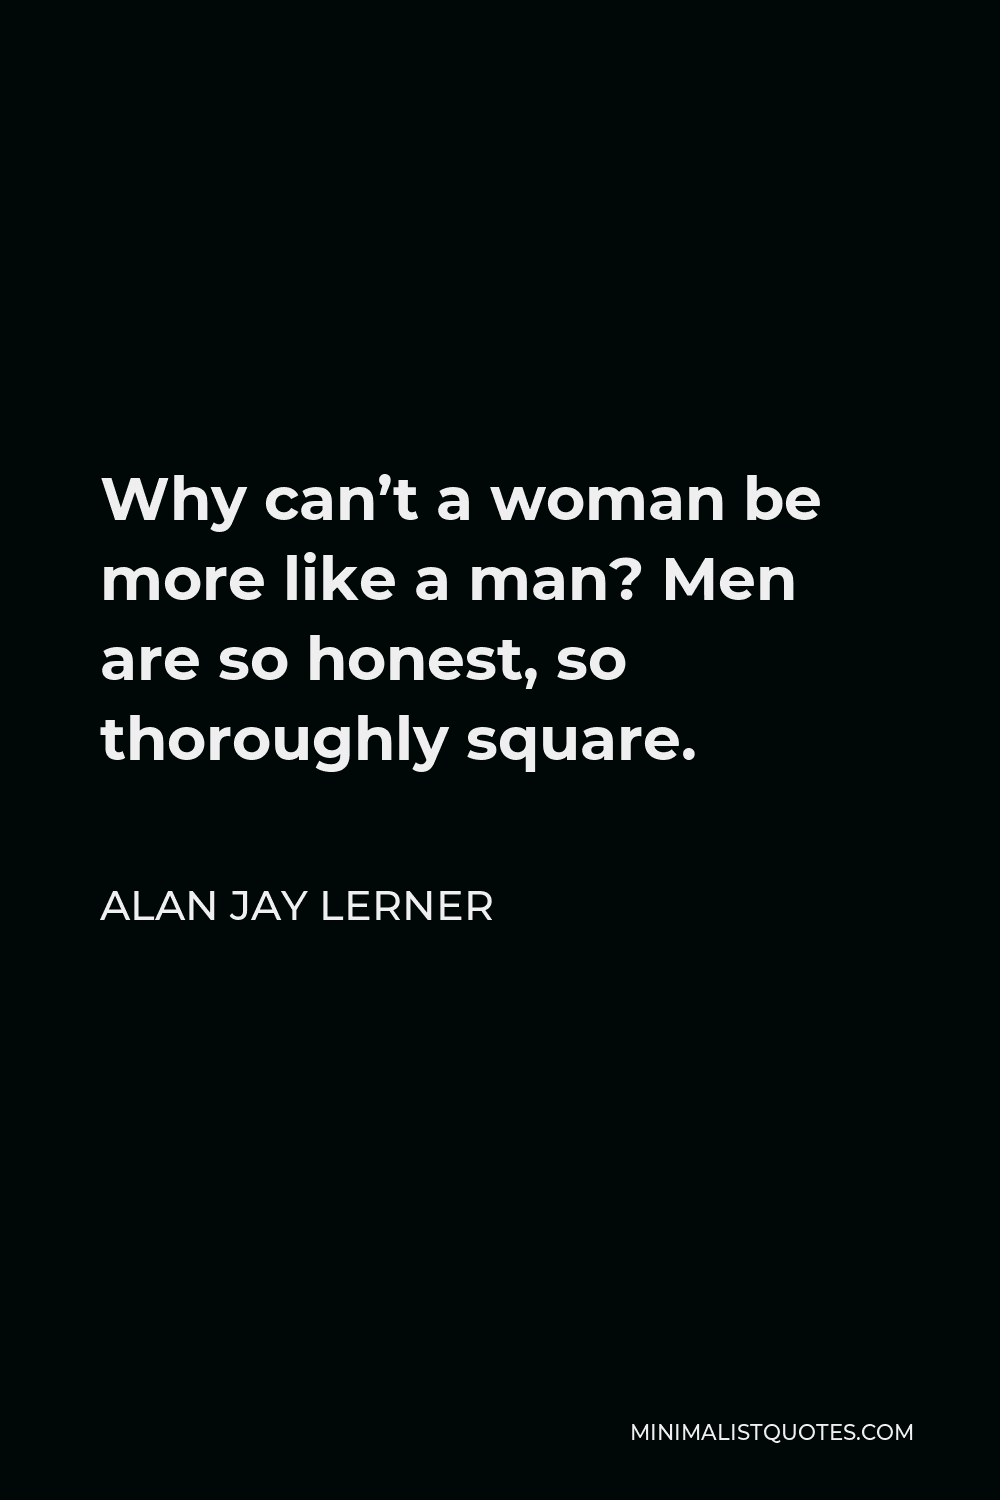 Alan Jay Lerner Quote - Why can’t a woman be more like a man? Men are so honest, so thoroughly square.